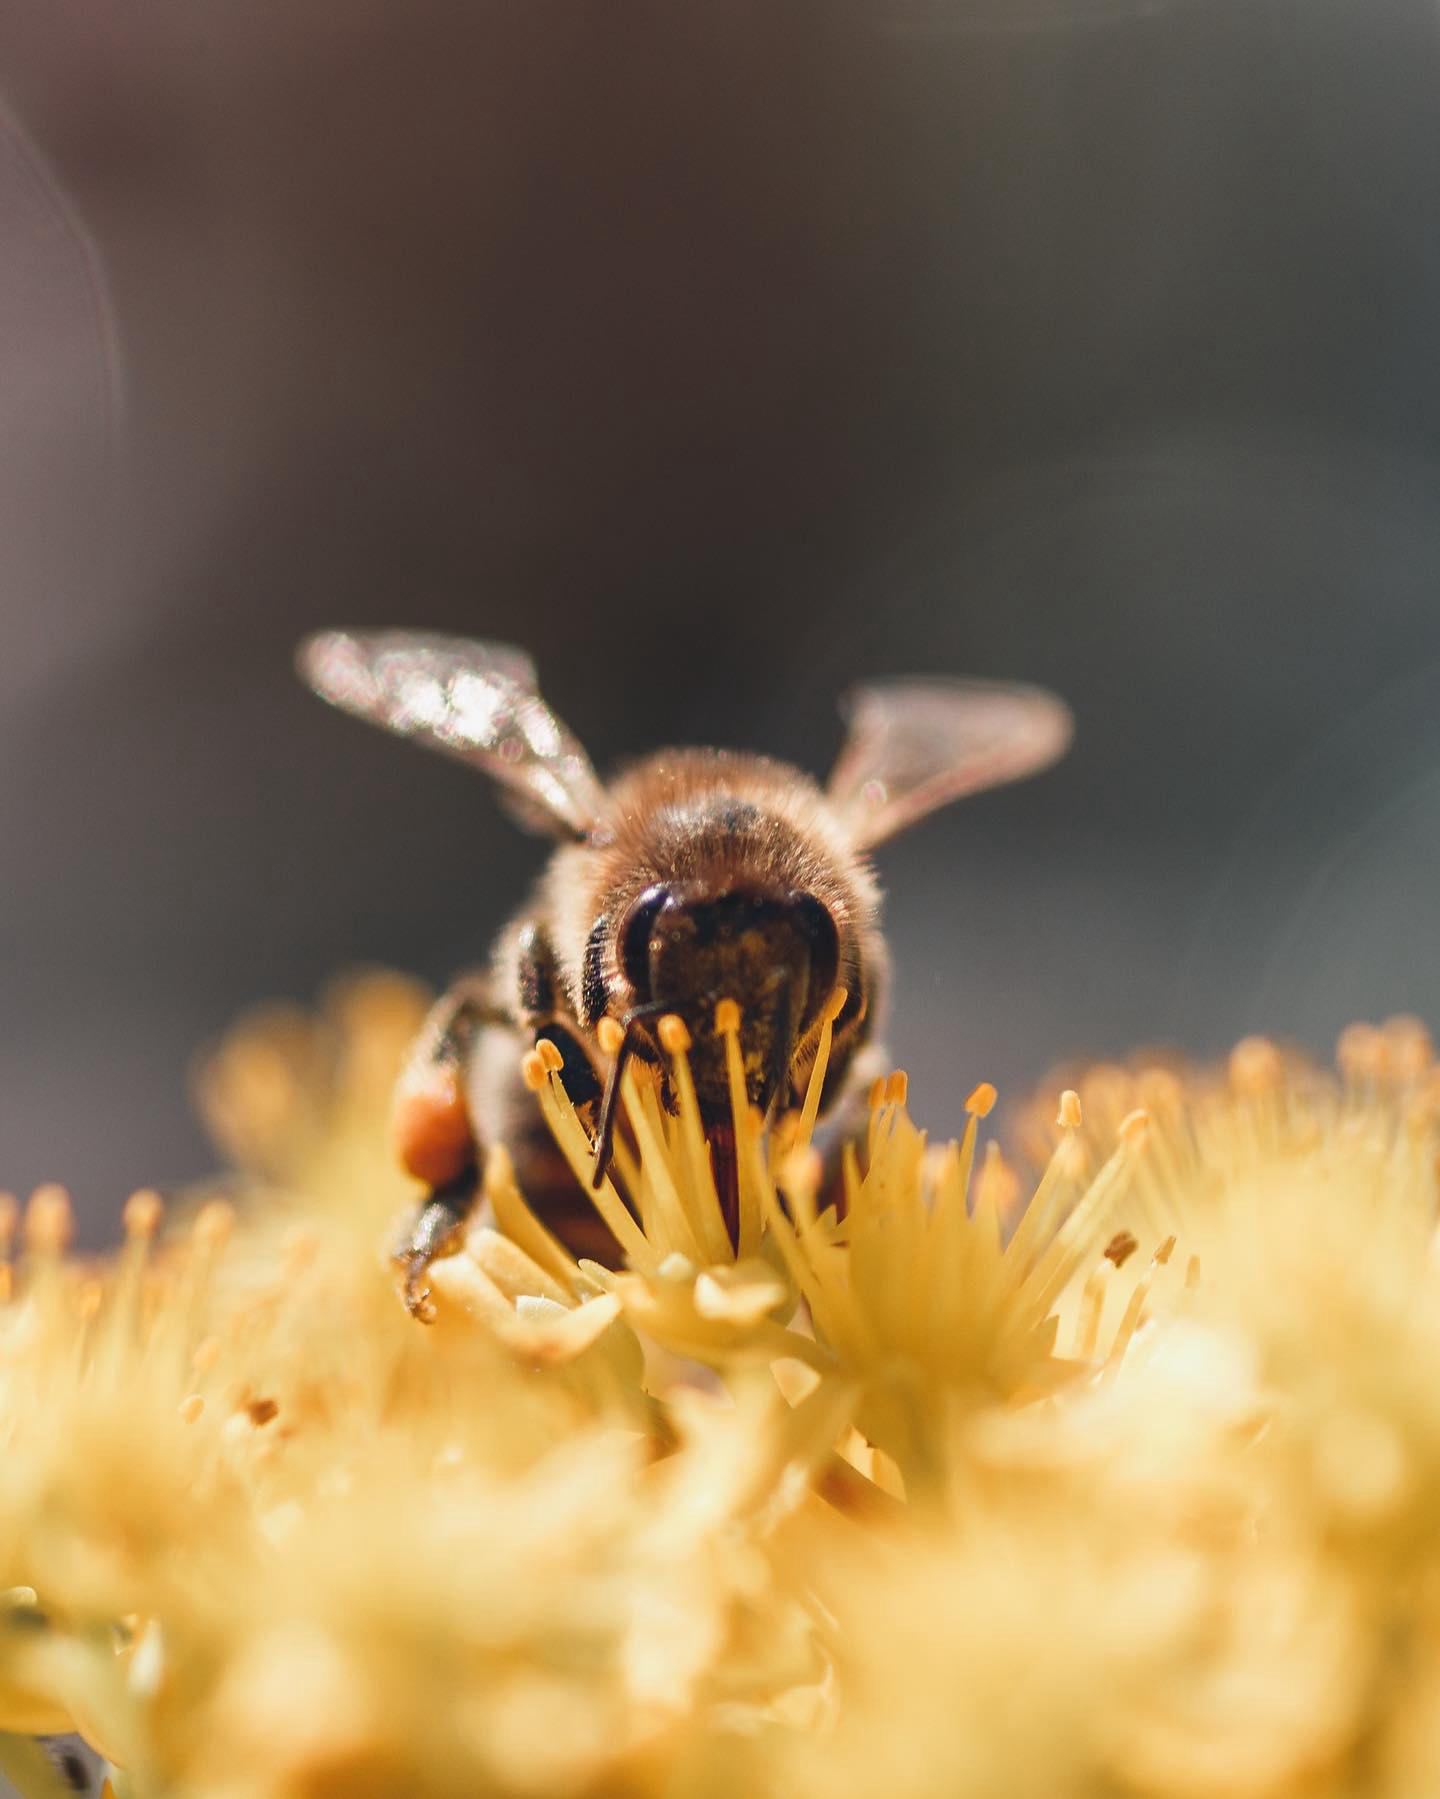 Guerlain - As part of the #GuerlainForBees initiative, Guerlain is committed to protecting the futur